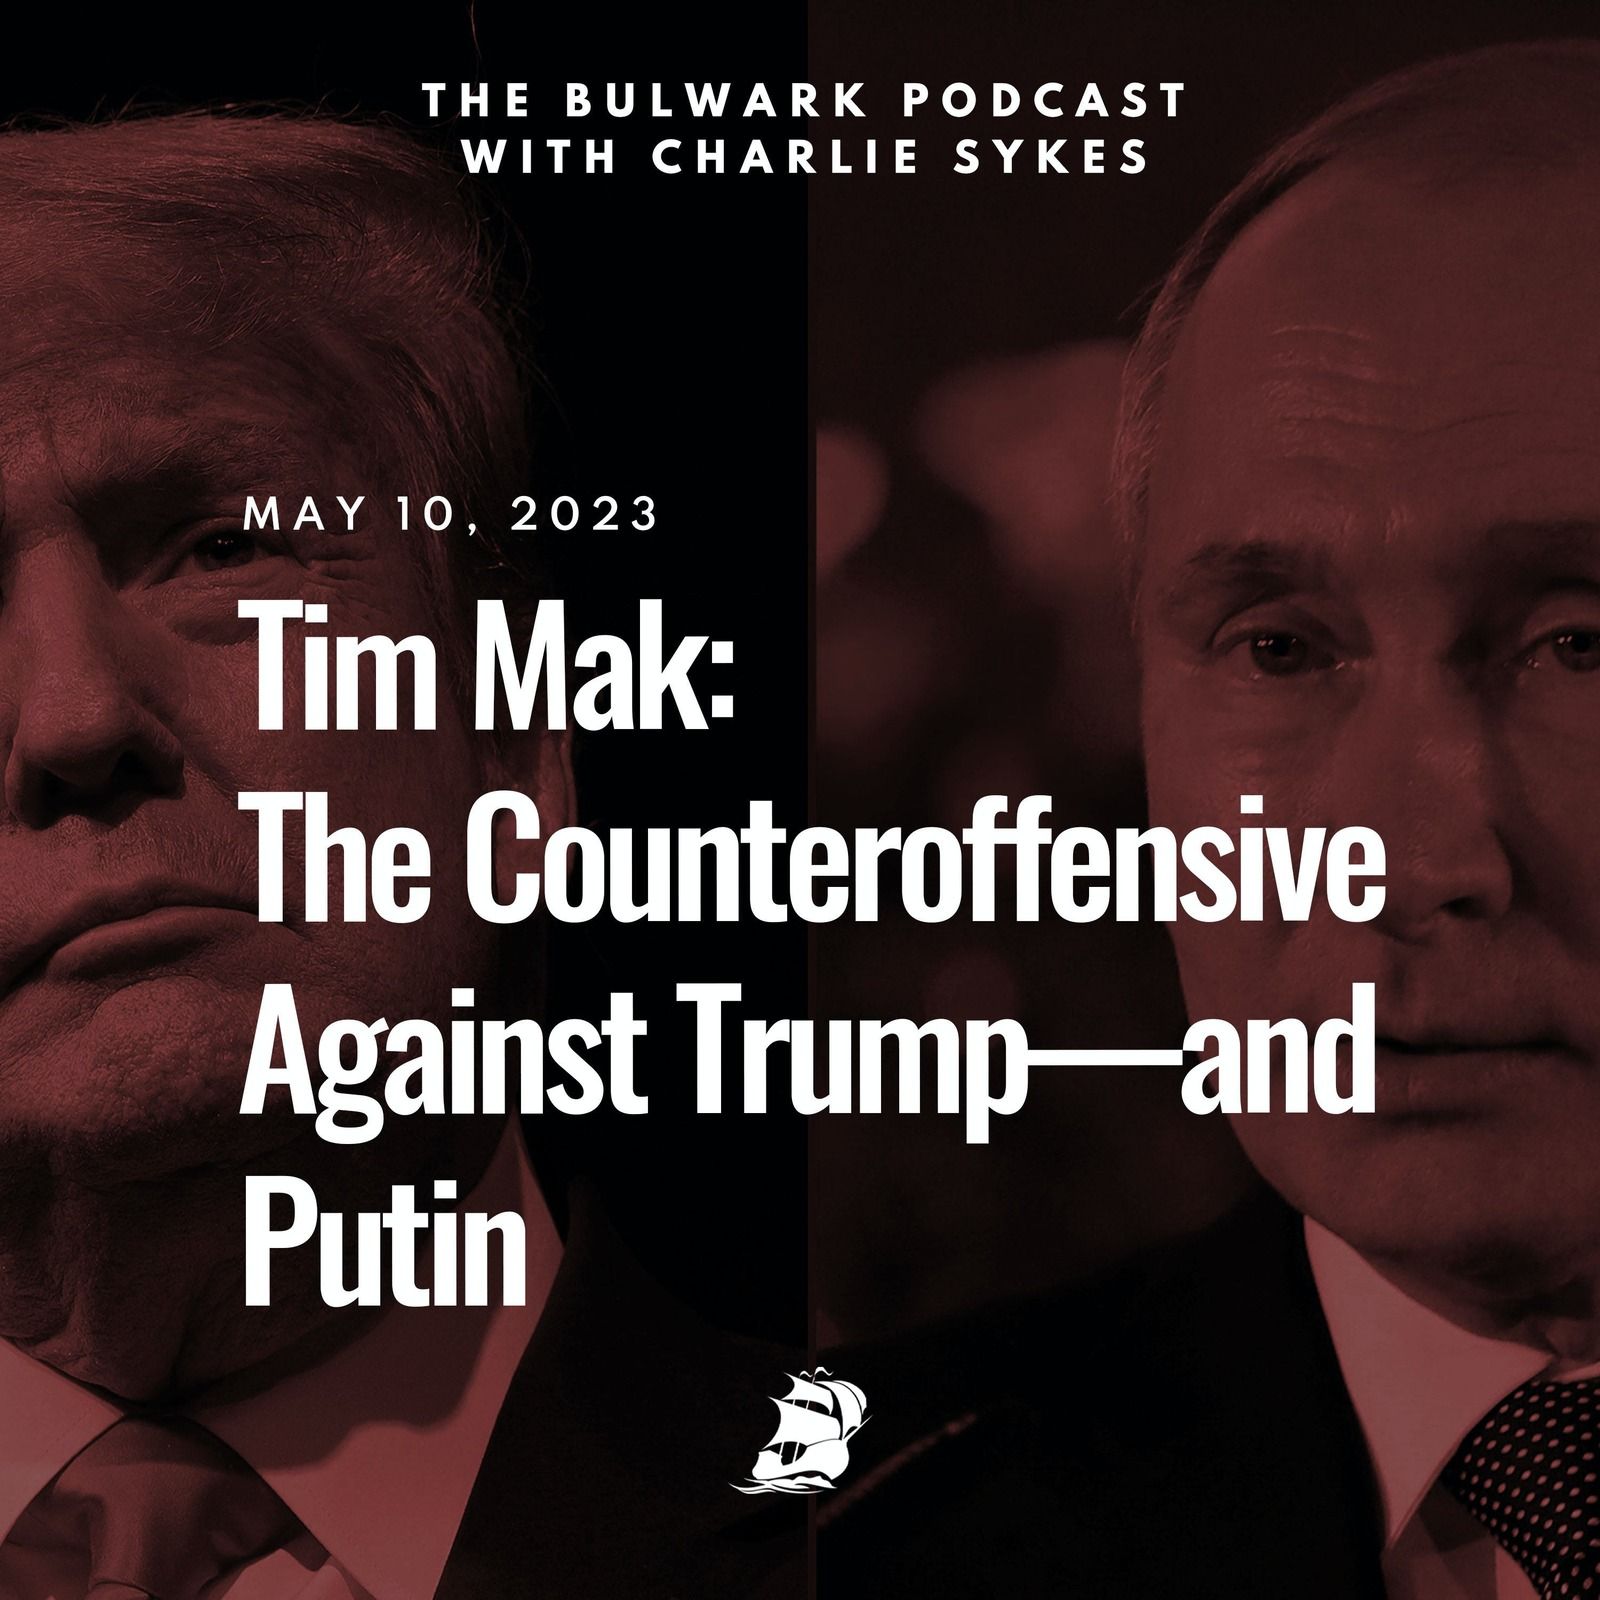 The Counteroffensive Against Trump—and Putin